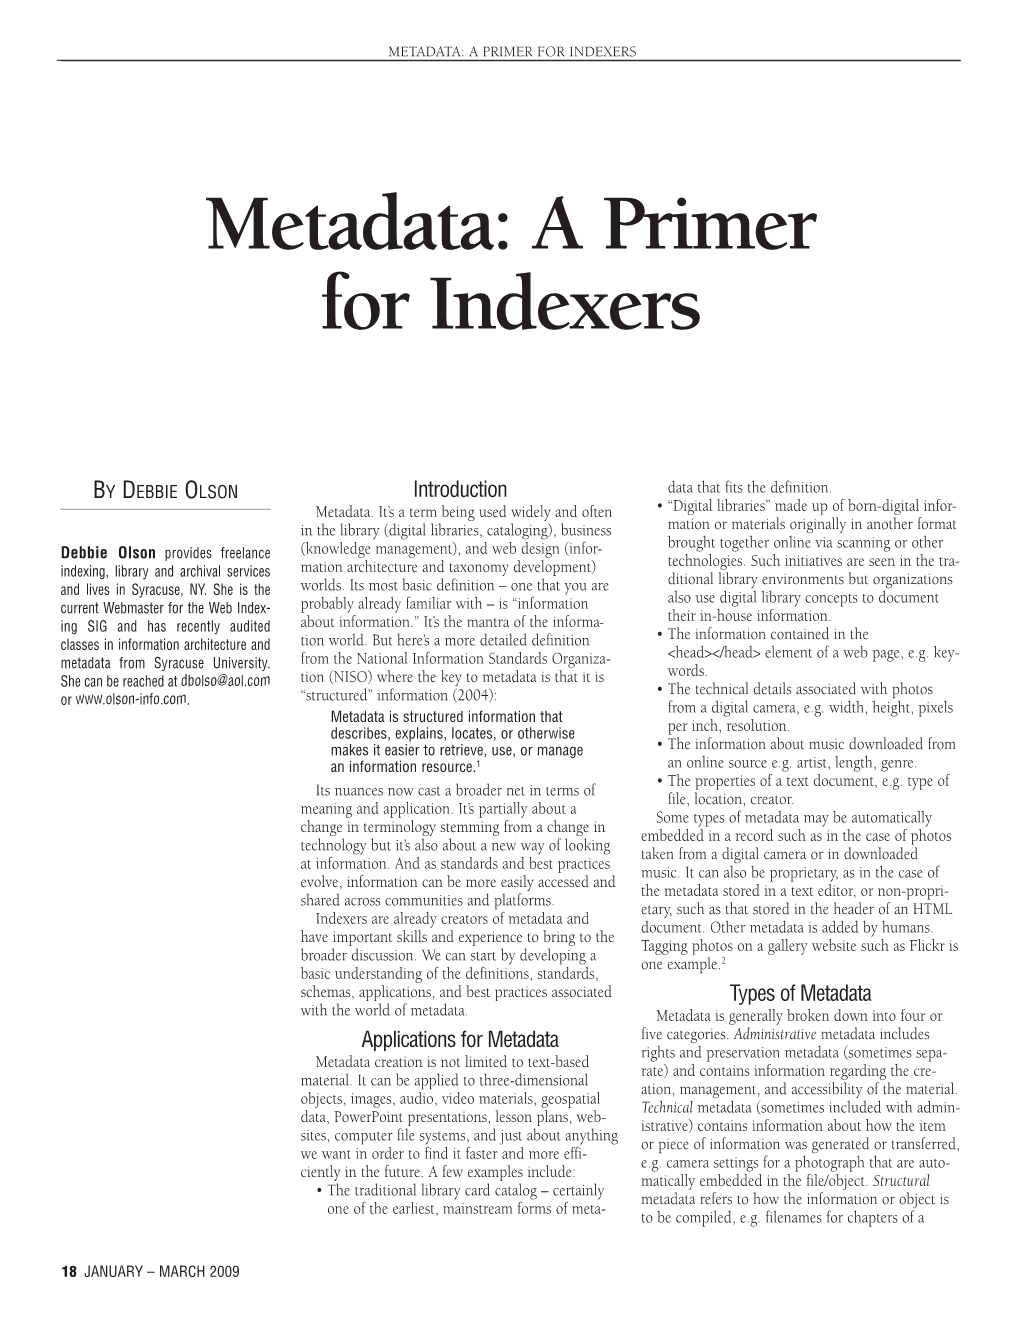 Metadata: a Primer for Indexers